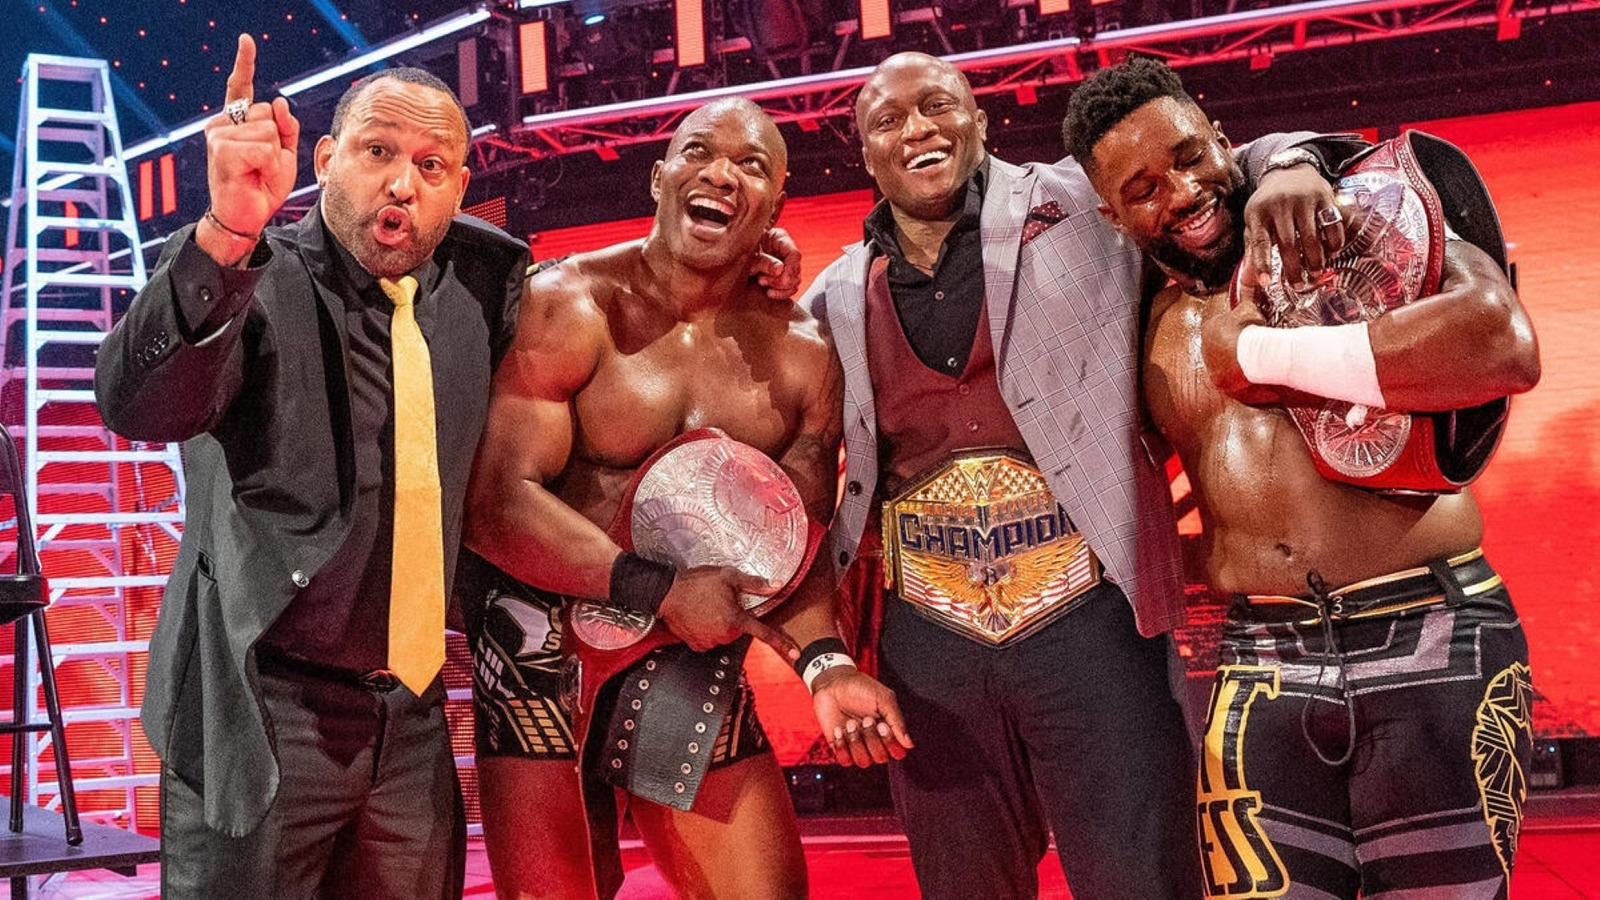 MVP Claims Triple H Refused to Reunite The Hurt Business, Suggests Racial Bias Involved